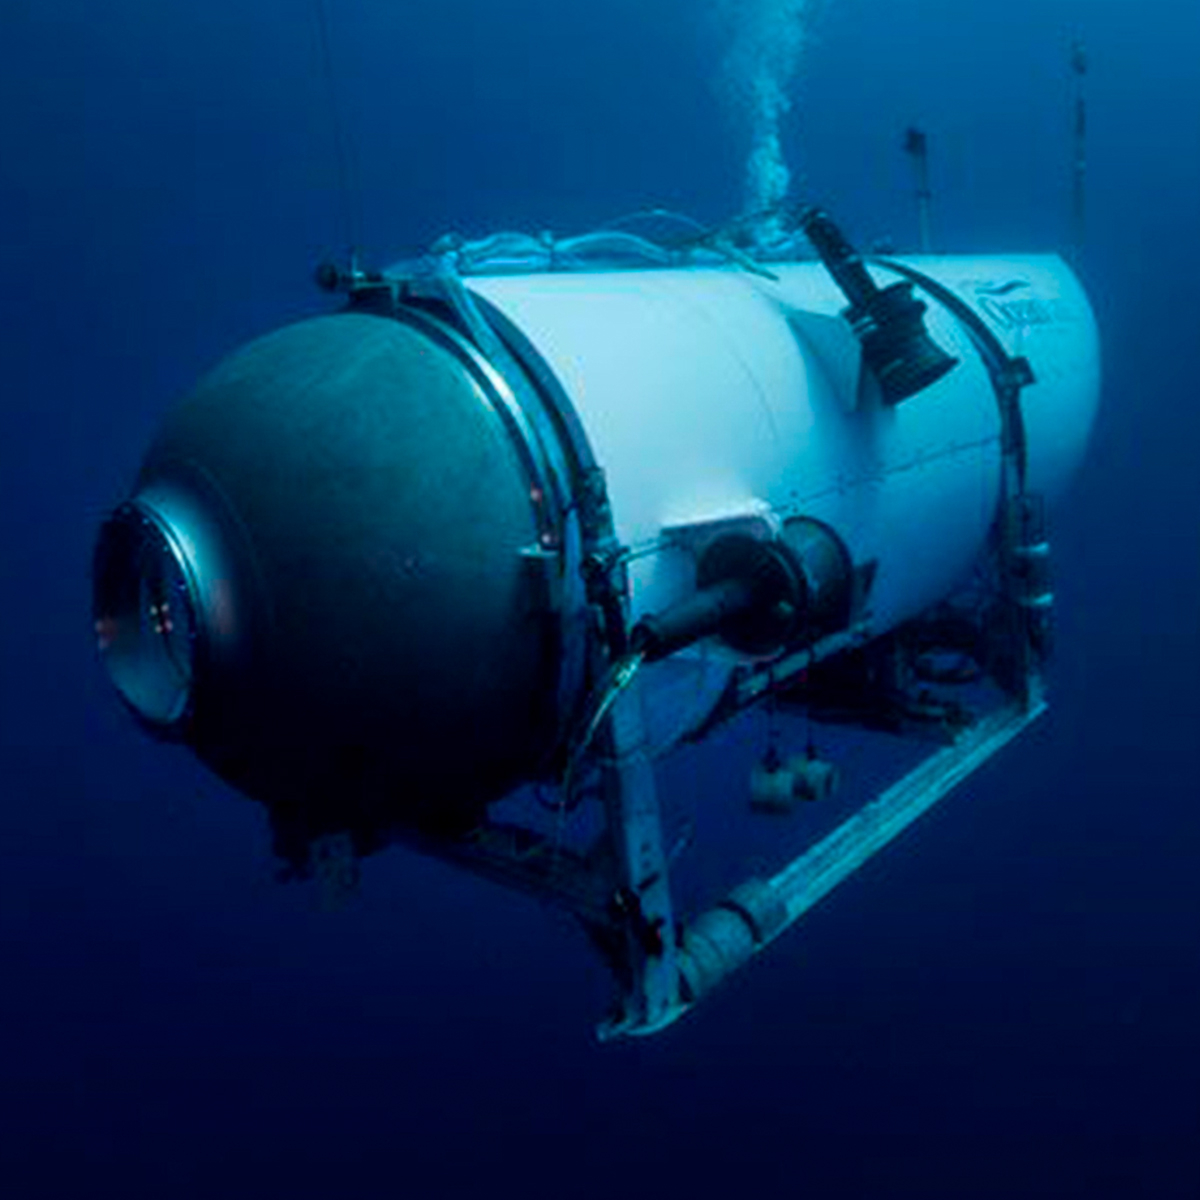 Inside the Titanic Submersible Voyage That Ended With 5 People Dead